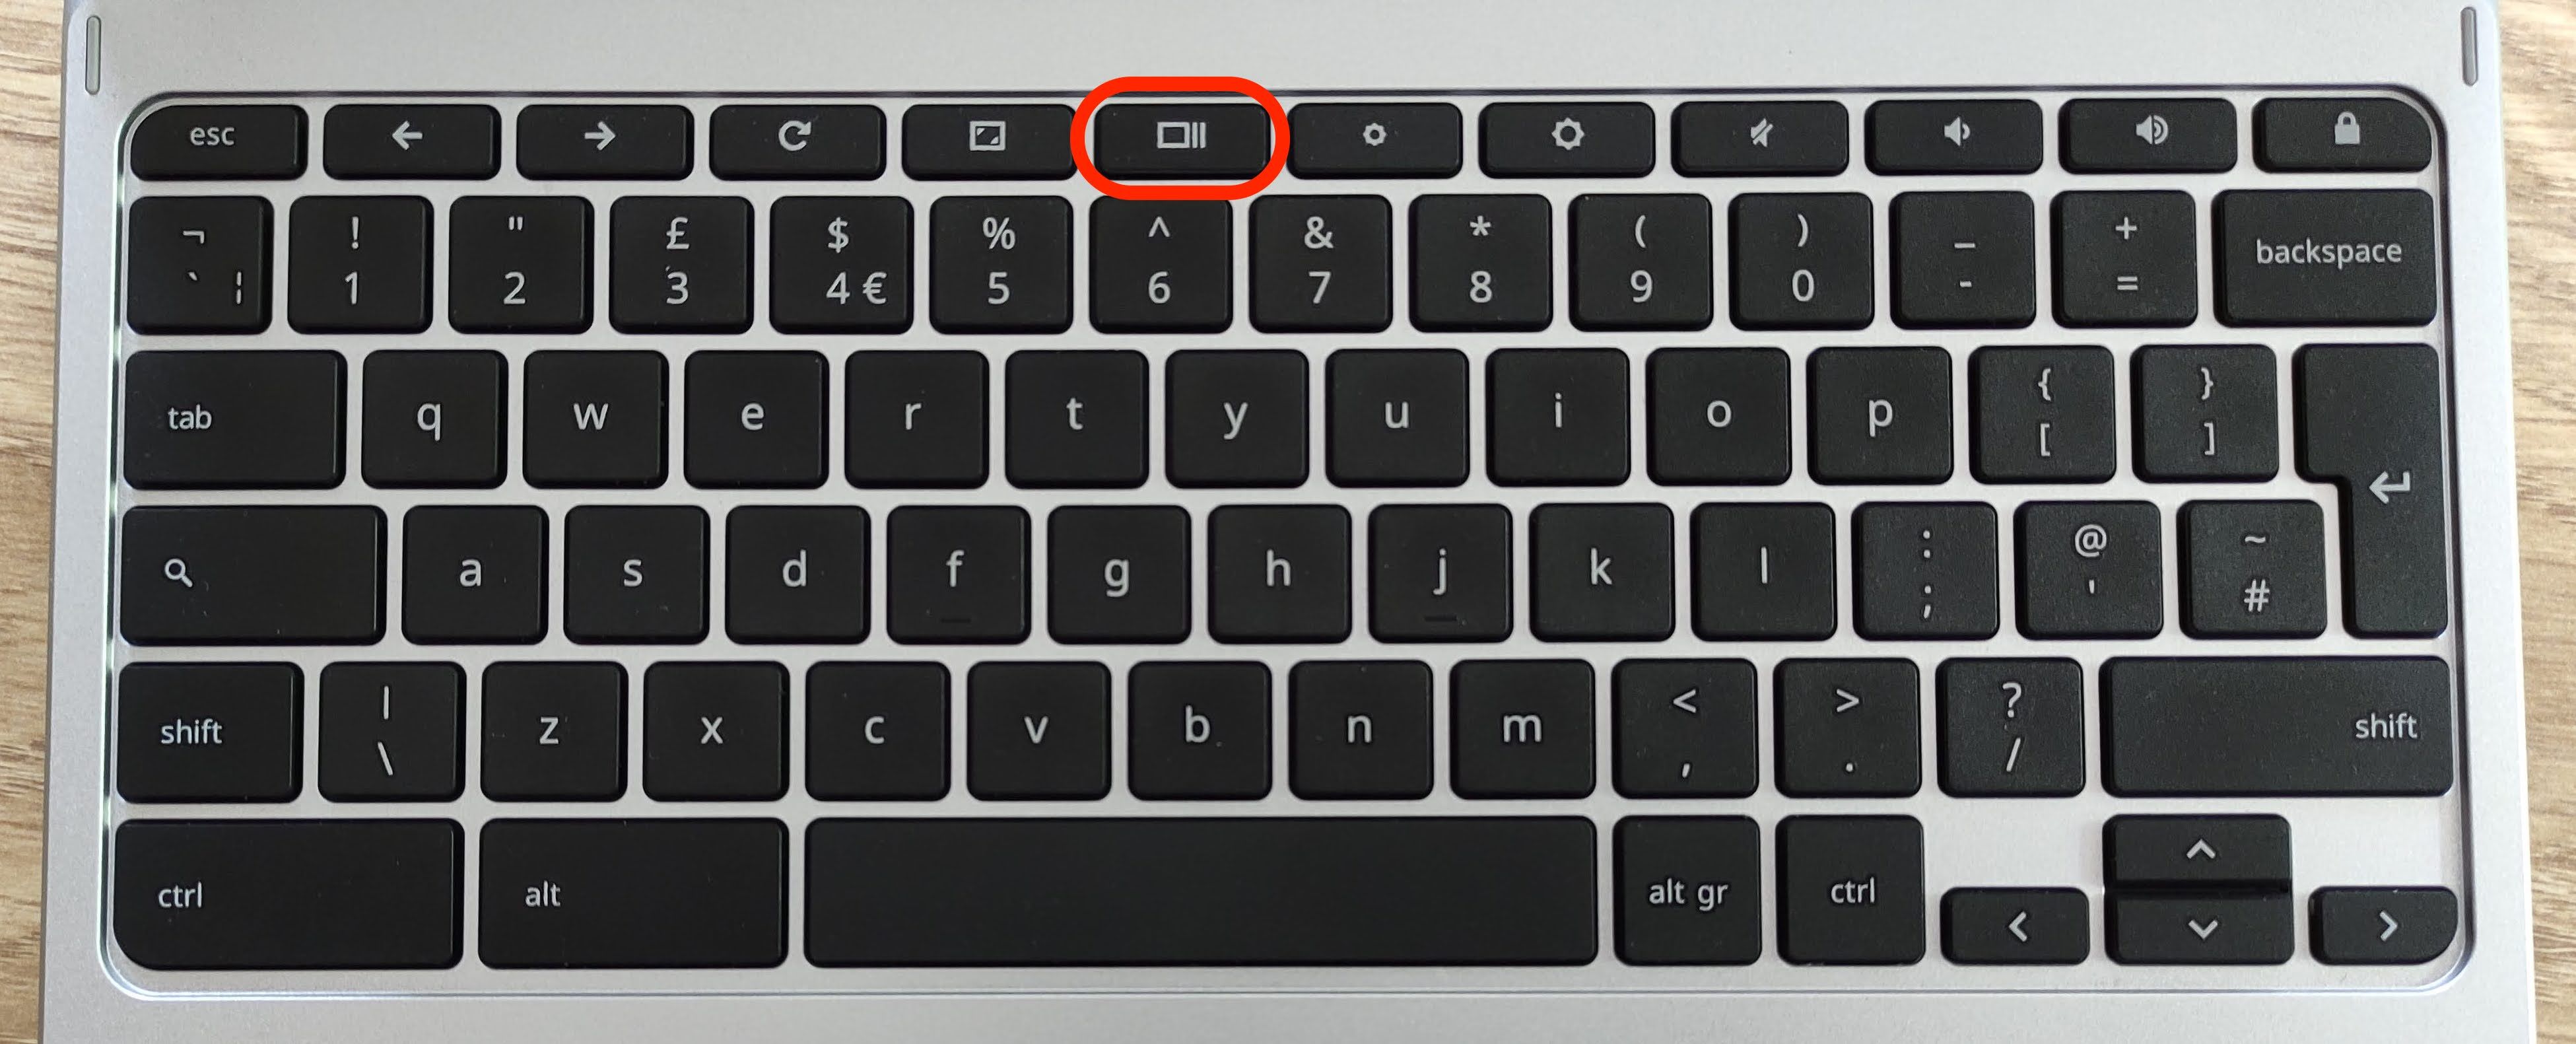 Chromebook keyboard with Show All Windows Key highlighted